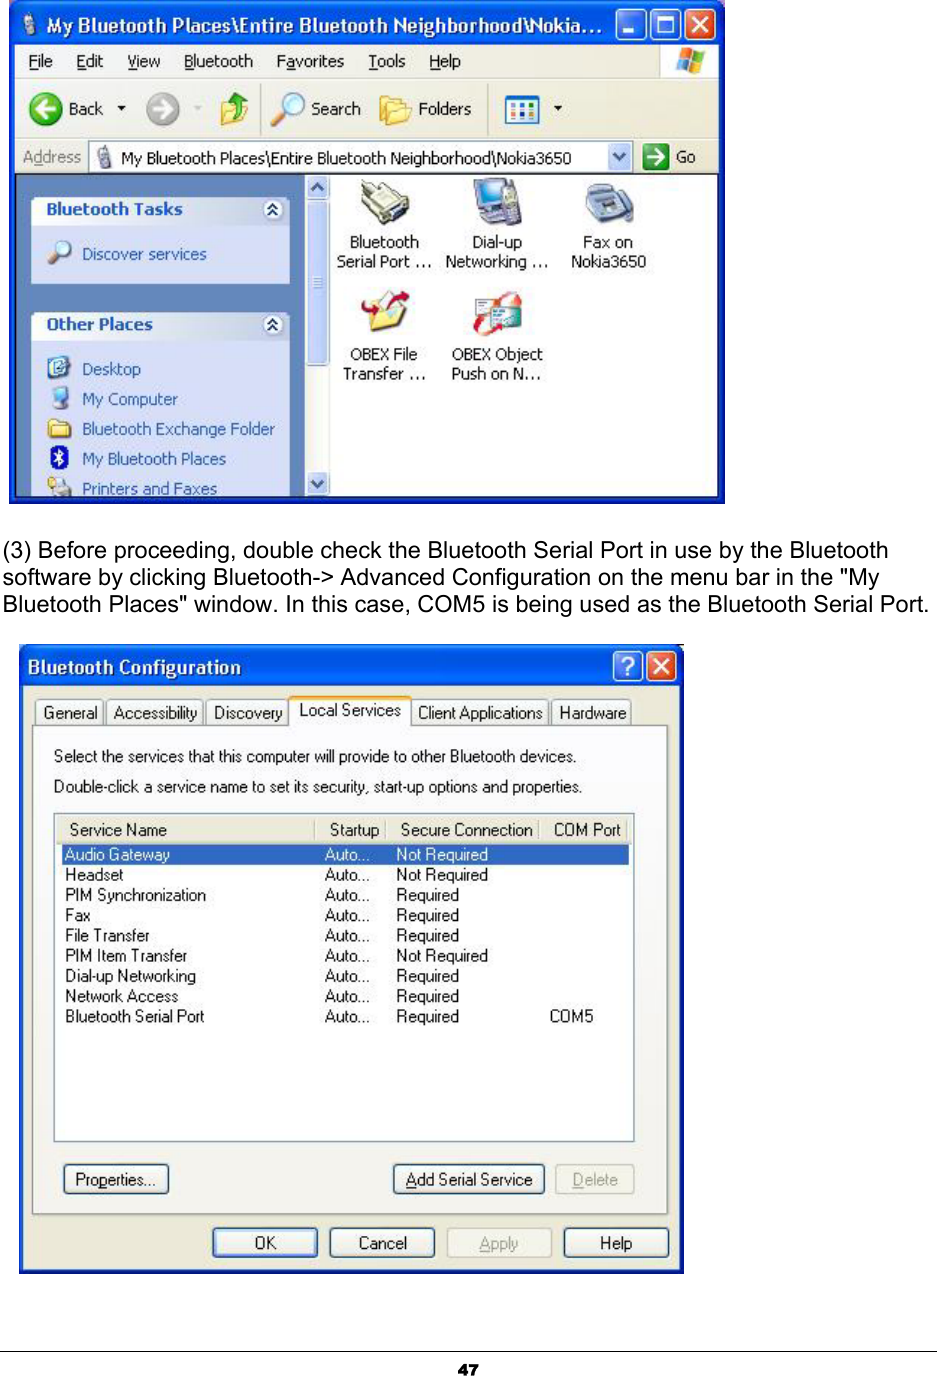  47   (3) Before proceeding, double check the Bluetooth Serial Port in use by the Bluetooth software by clicking Bluetooth-&gt; Advanced Configuration on the menu bar in the &quot;My Bluetooth Places&quot; window. In this case, COM5 is being used as the Bluetooth Serial Port.     